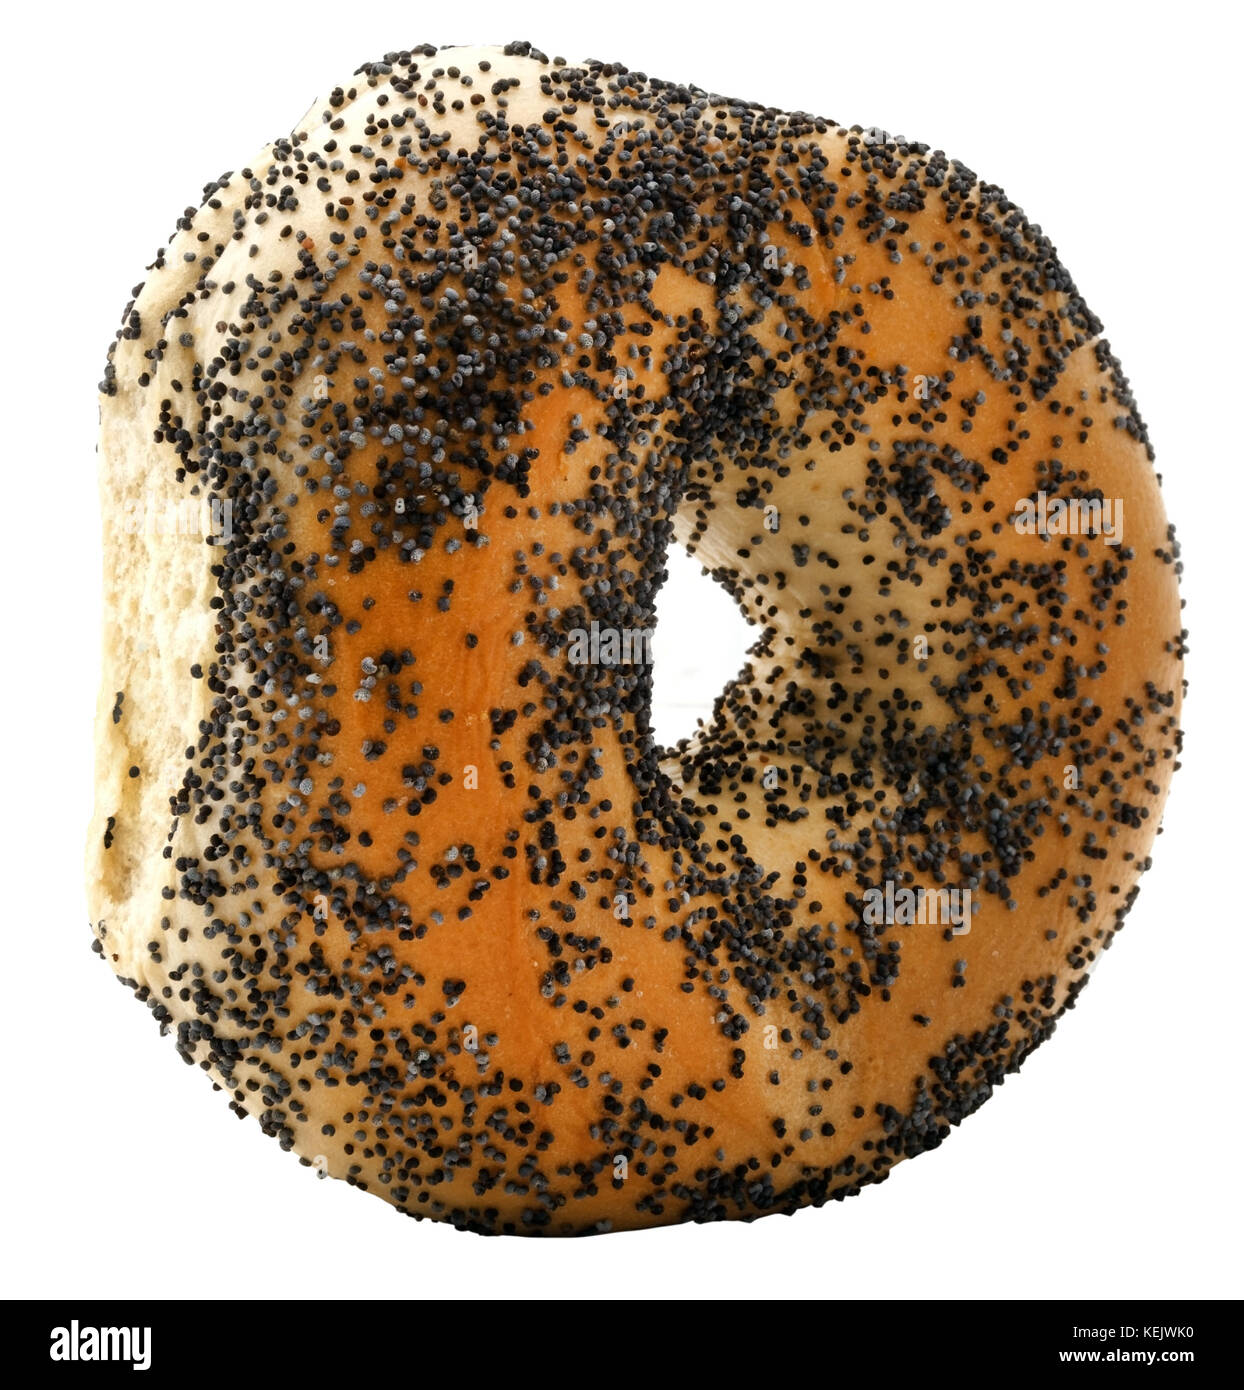 Isolated chubby poppy seed bagel. Stock Photo